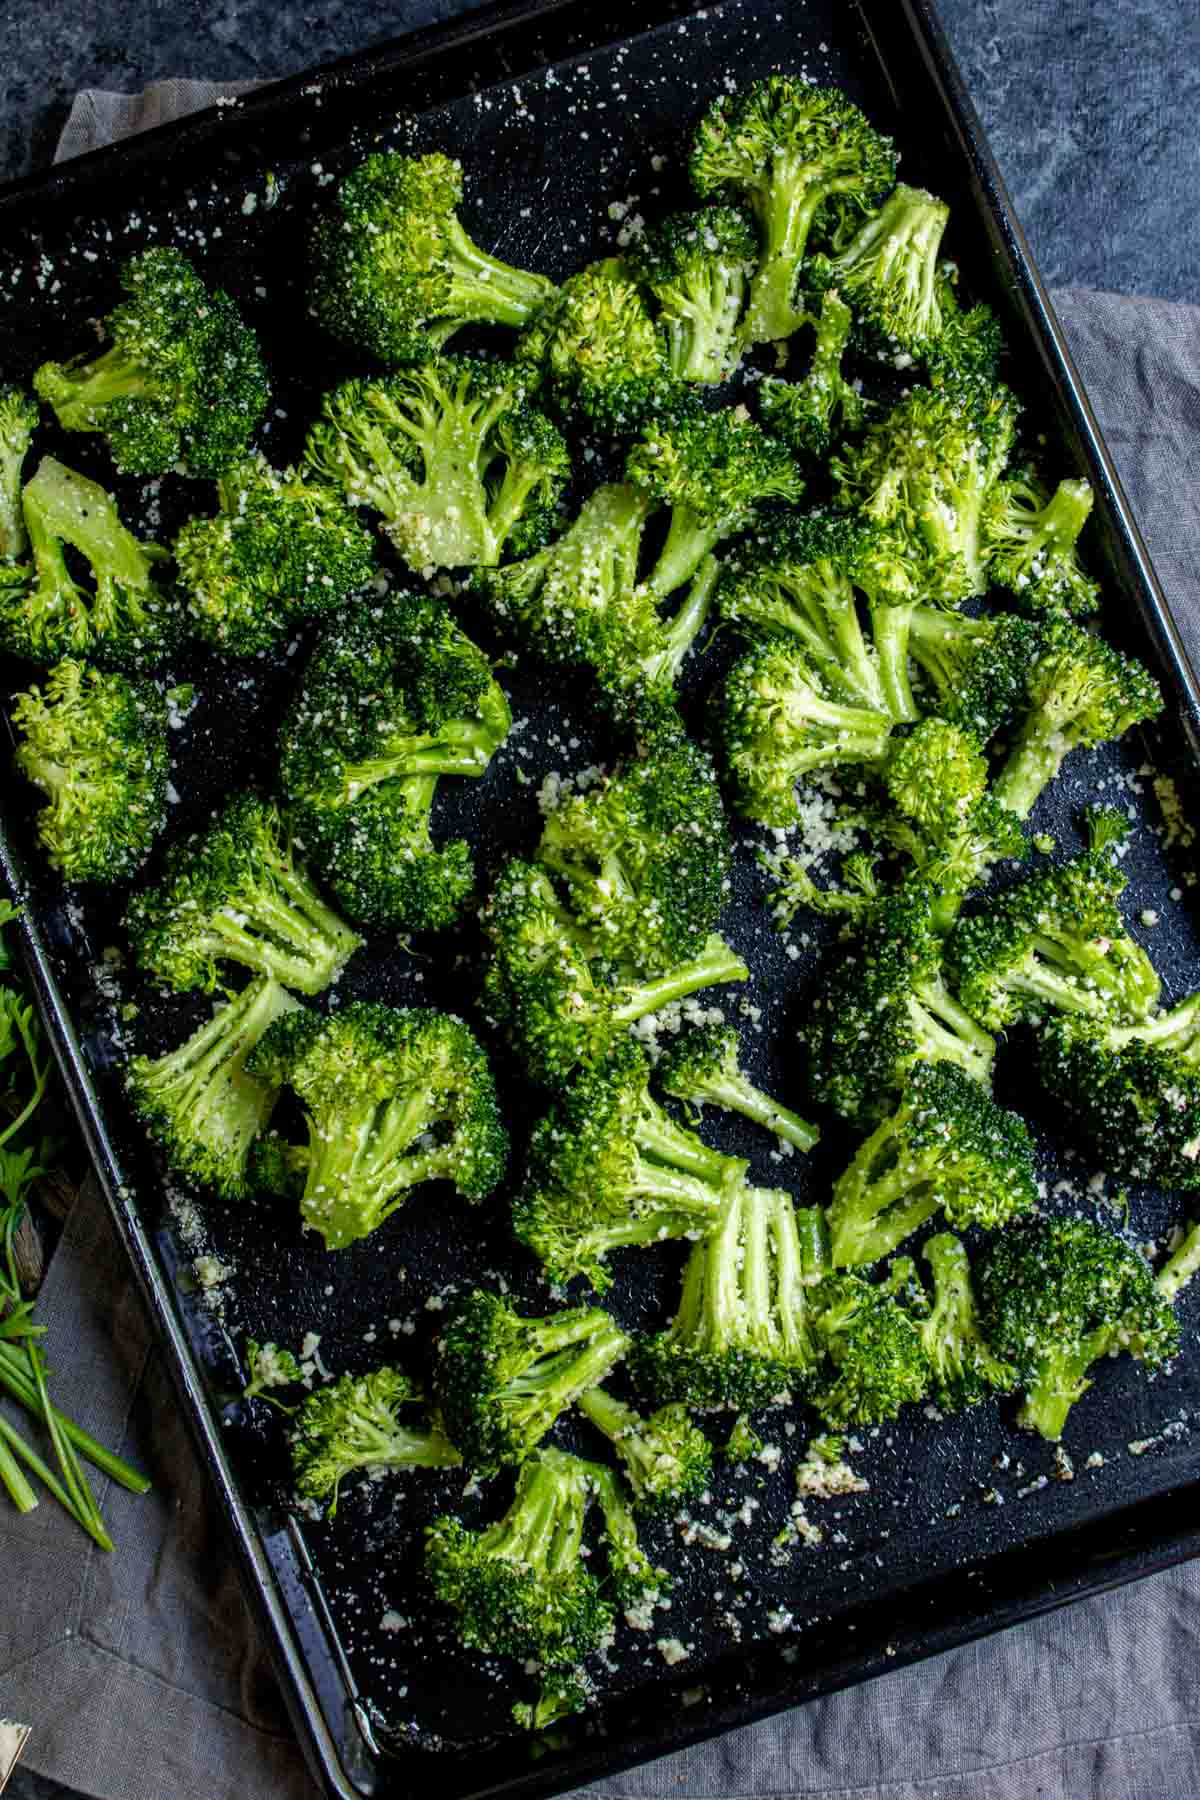 Air Fryer Broccoli florets seasoned with herbs on a baking tray, ready to be roasted.